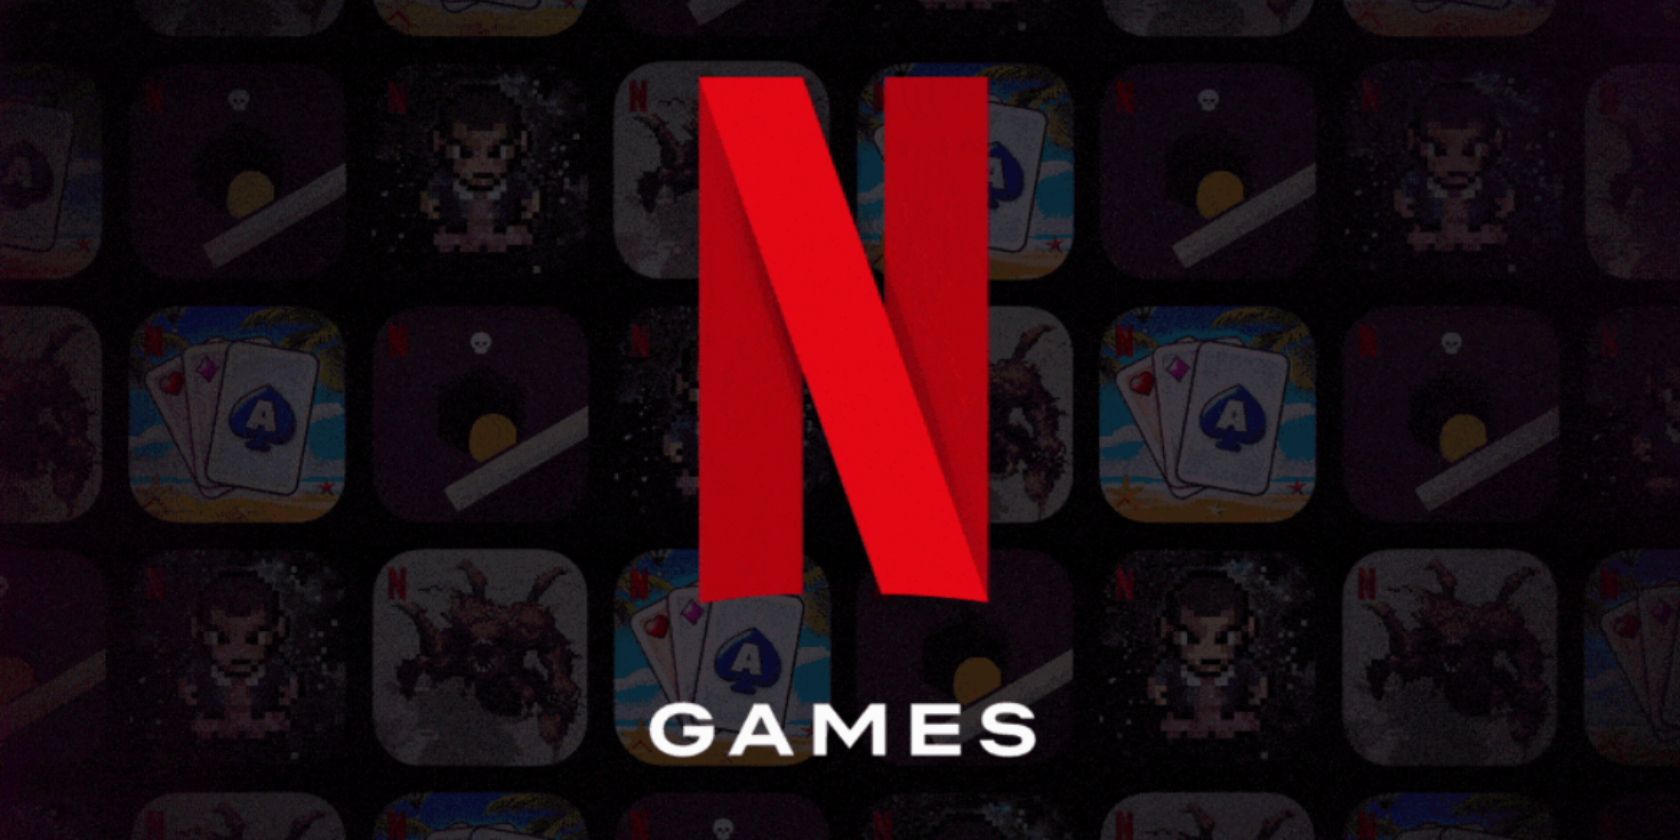 Netflix promoting its push into mobile games